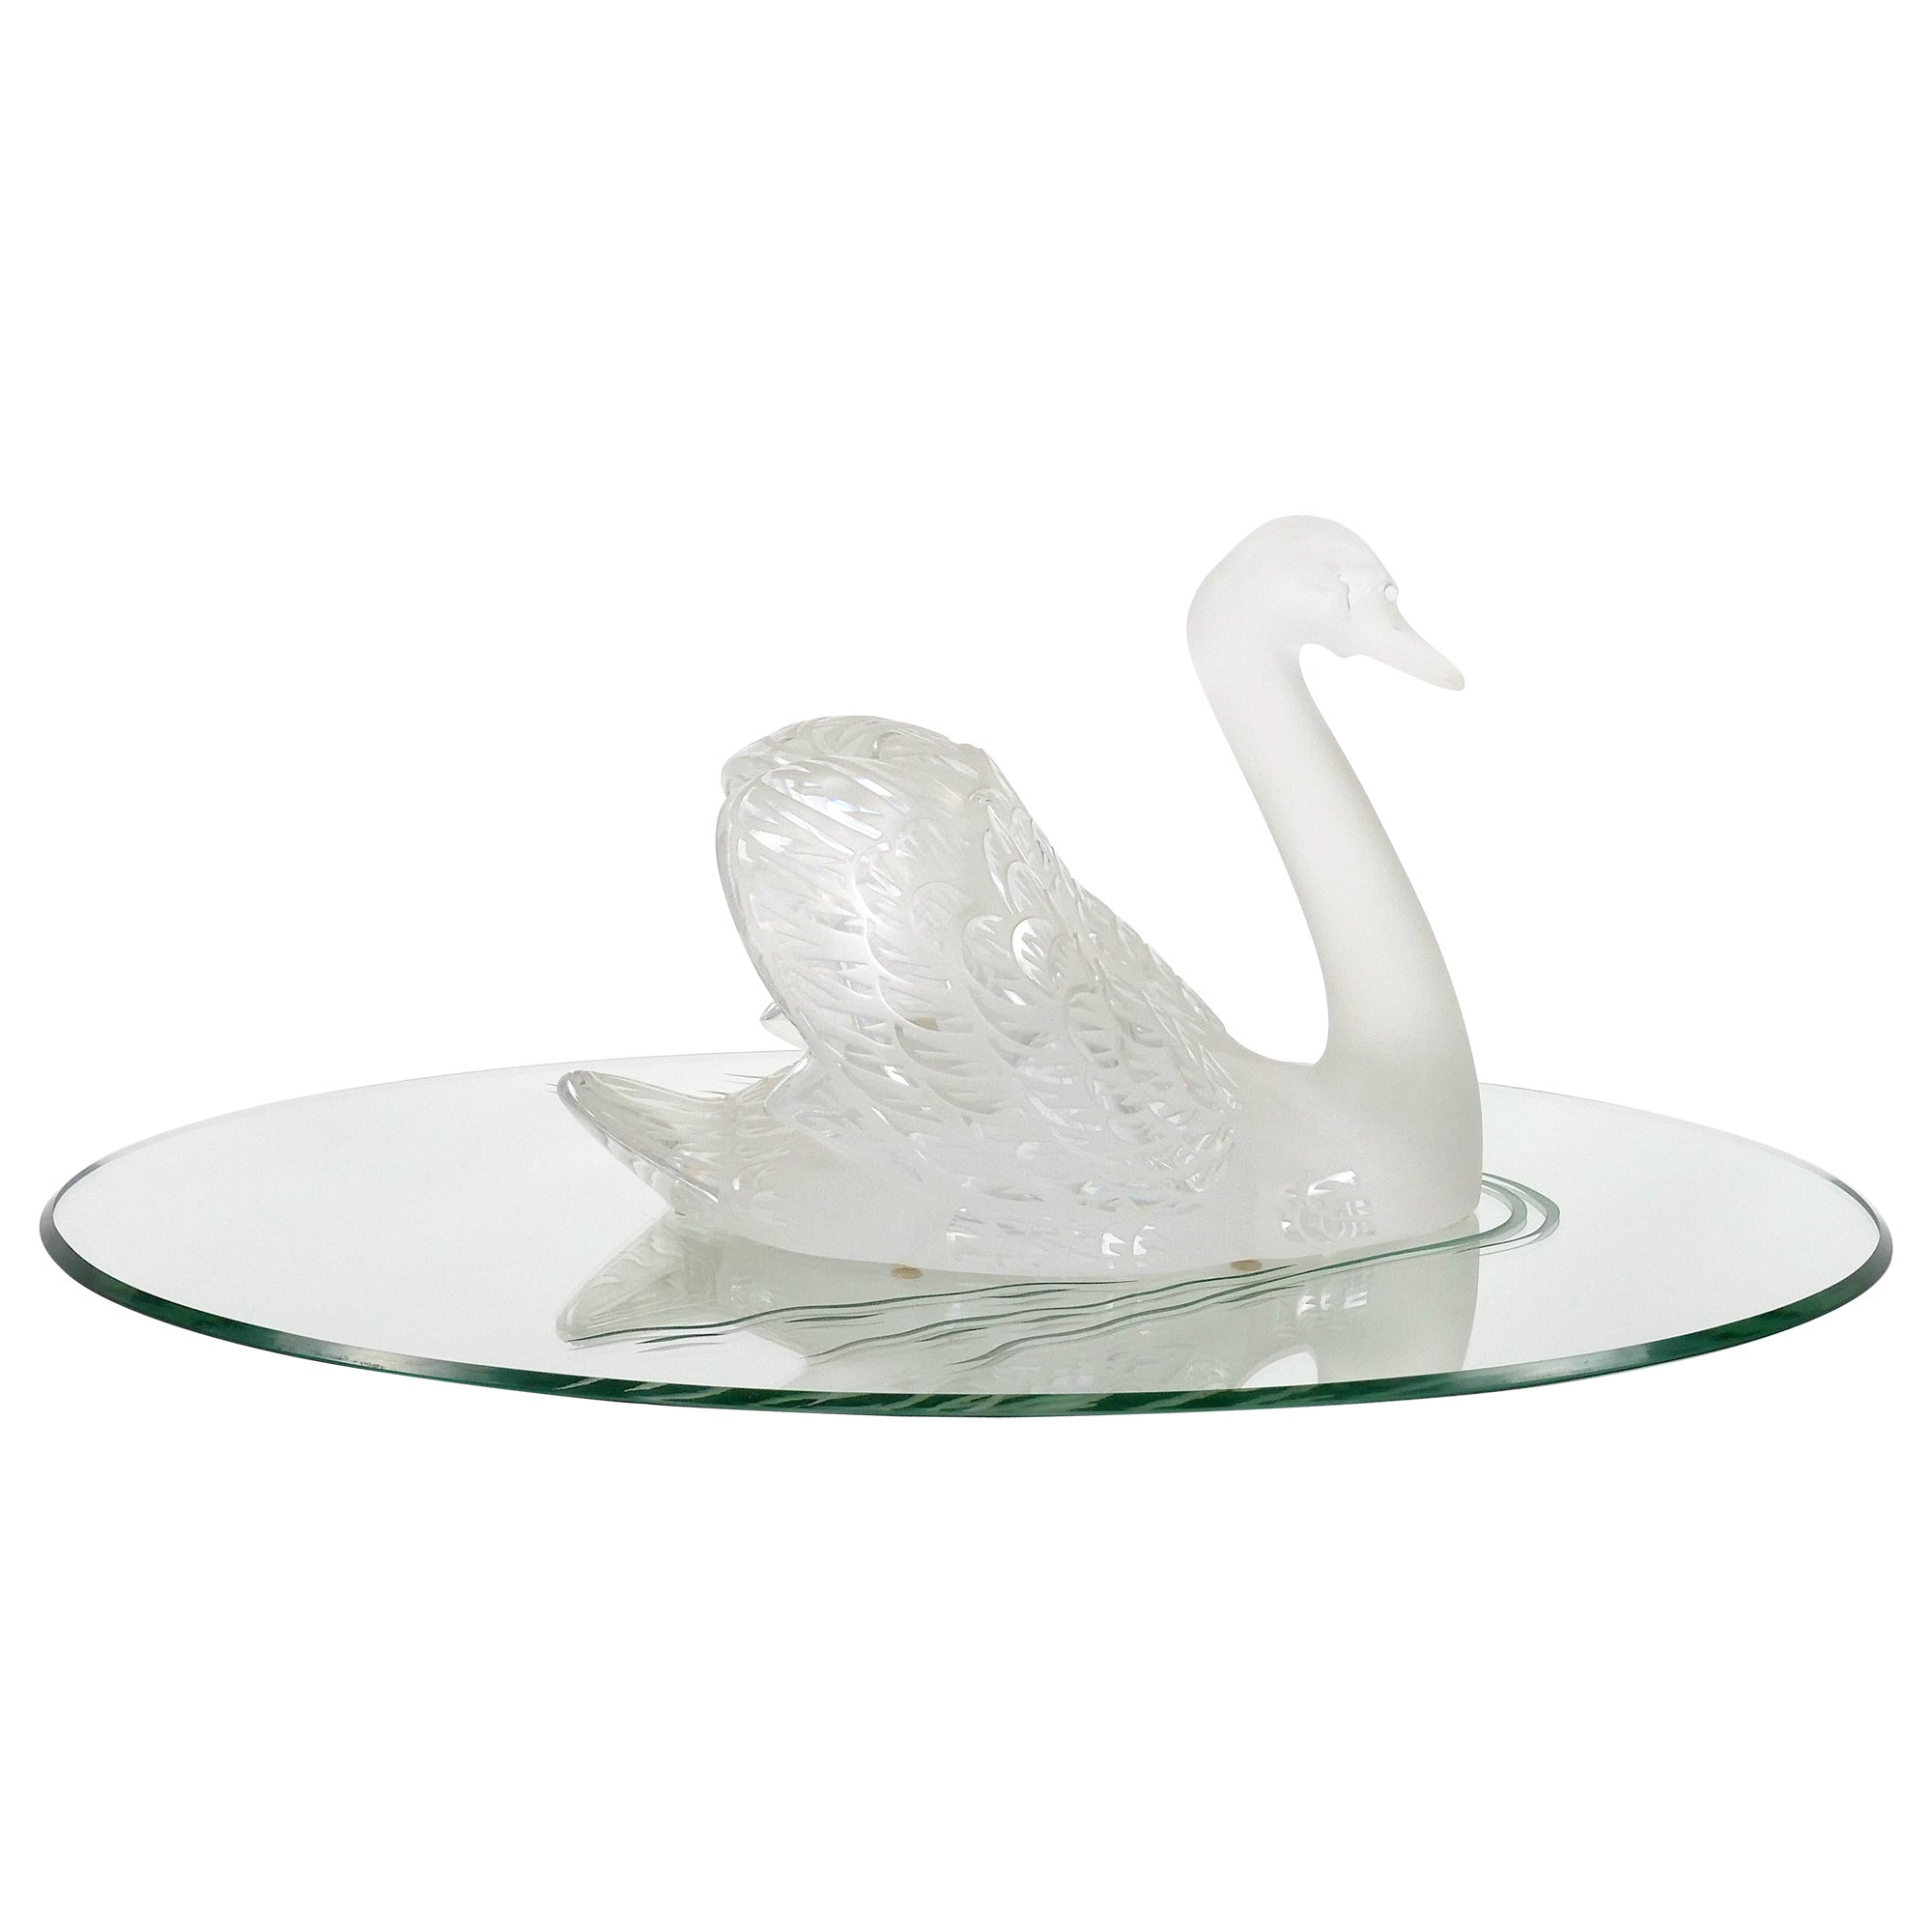  Lalique Crystal Frosted Head Down Swan Sculpture Resting On Mirrored Plateau For Sale